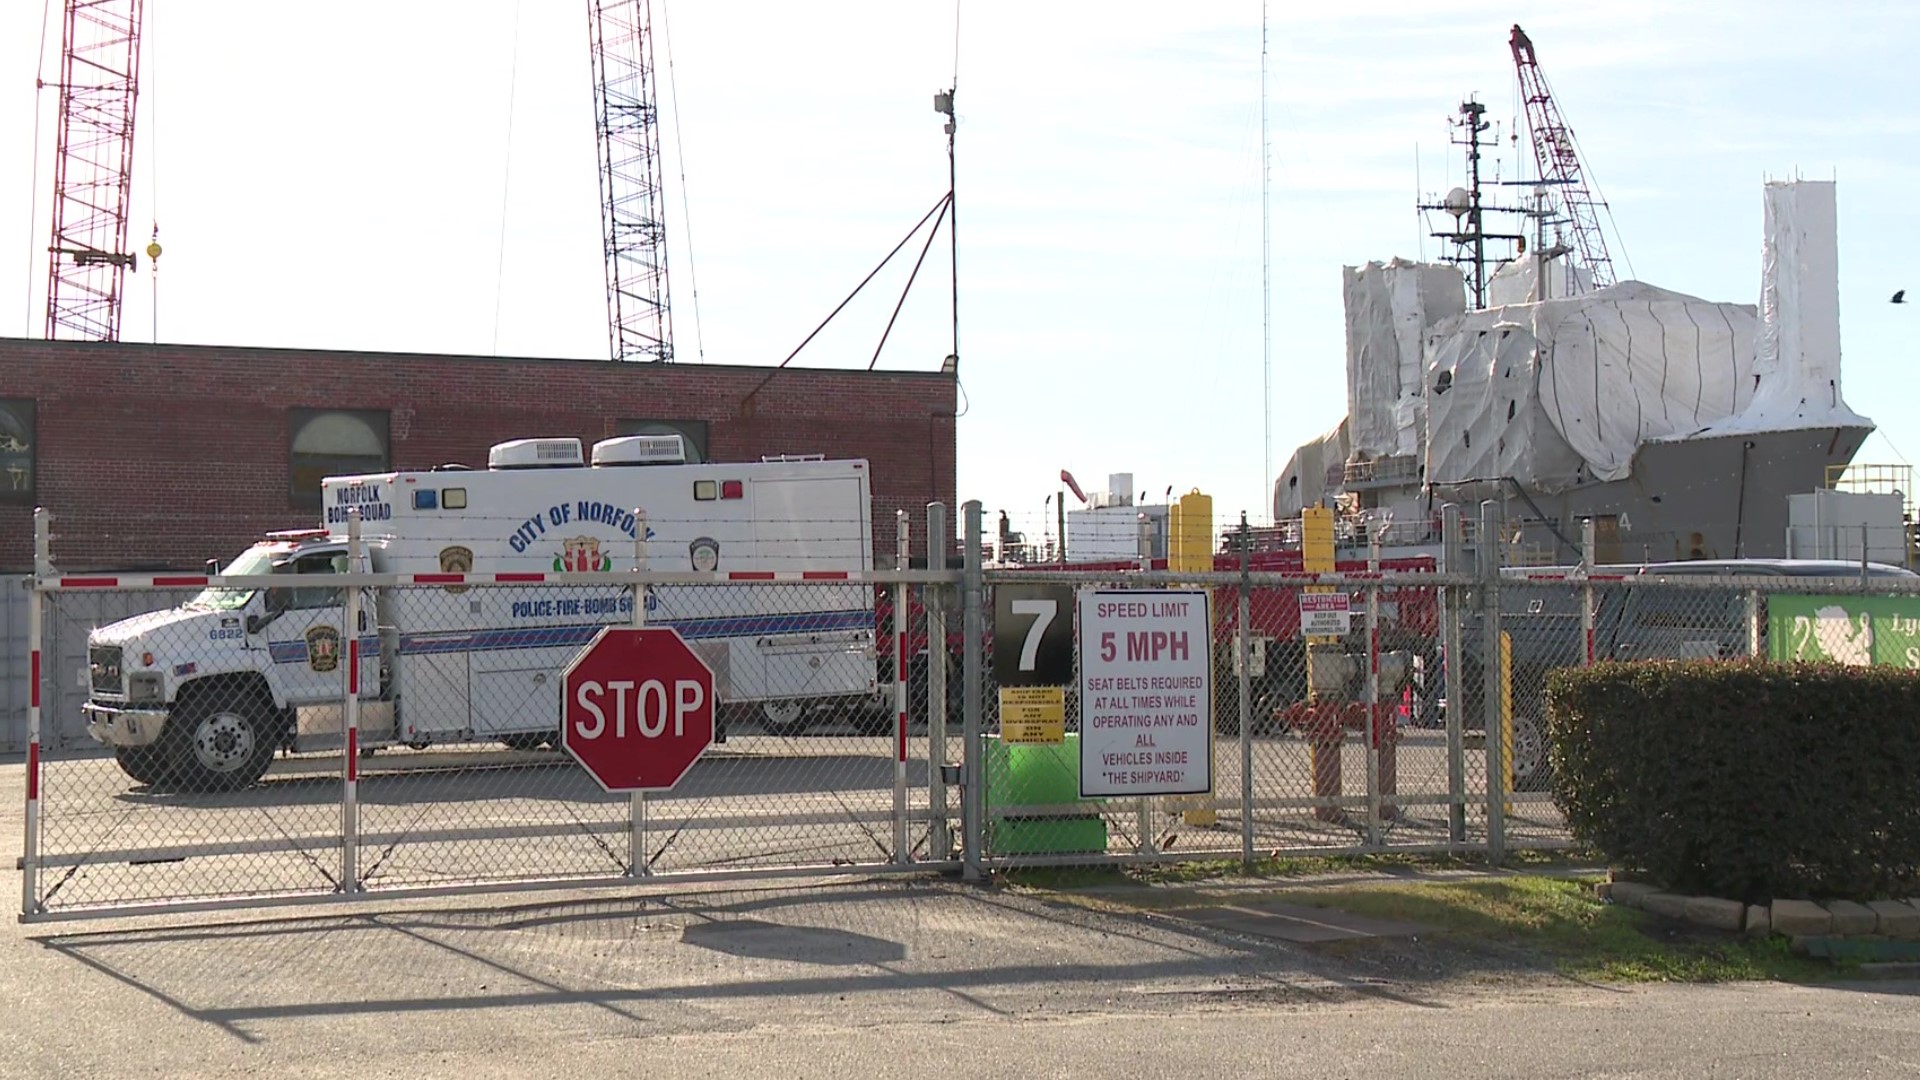 No one was hurt after a suspected explosive device was found inside a barge at a shipyard in Norfolk on Tuesday morning.